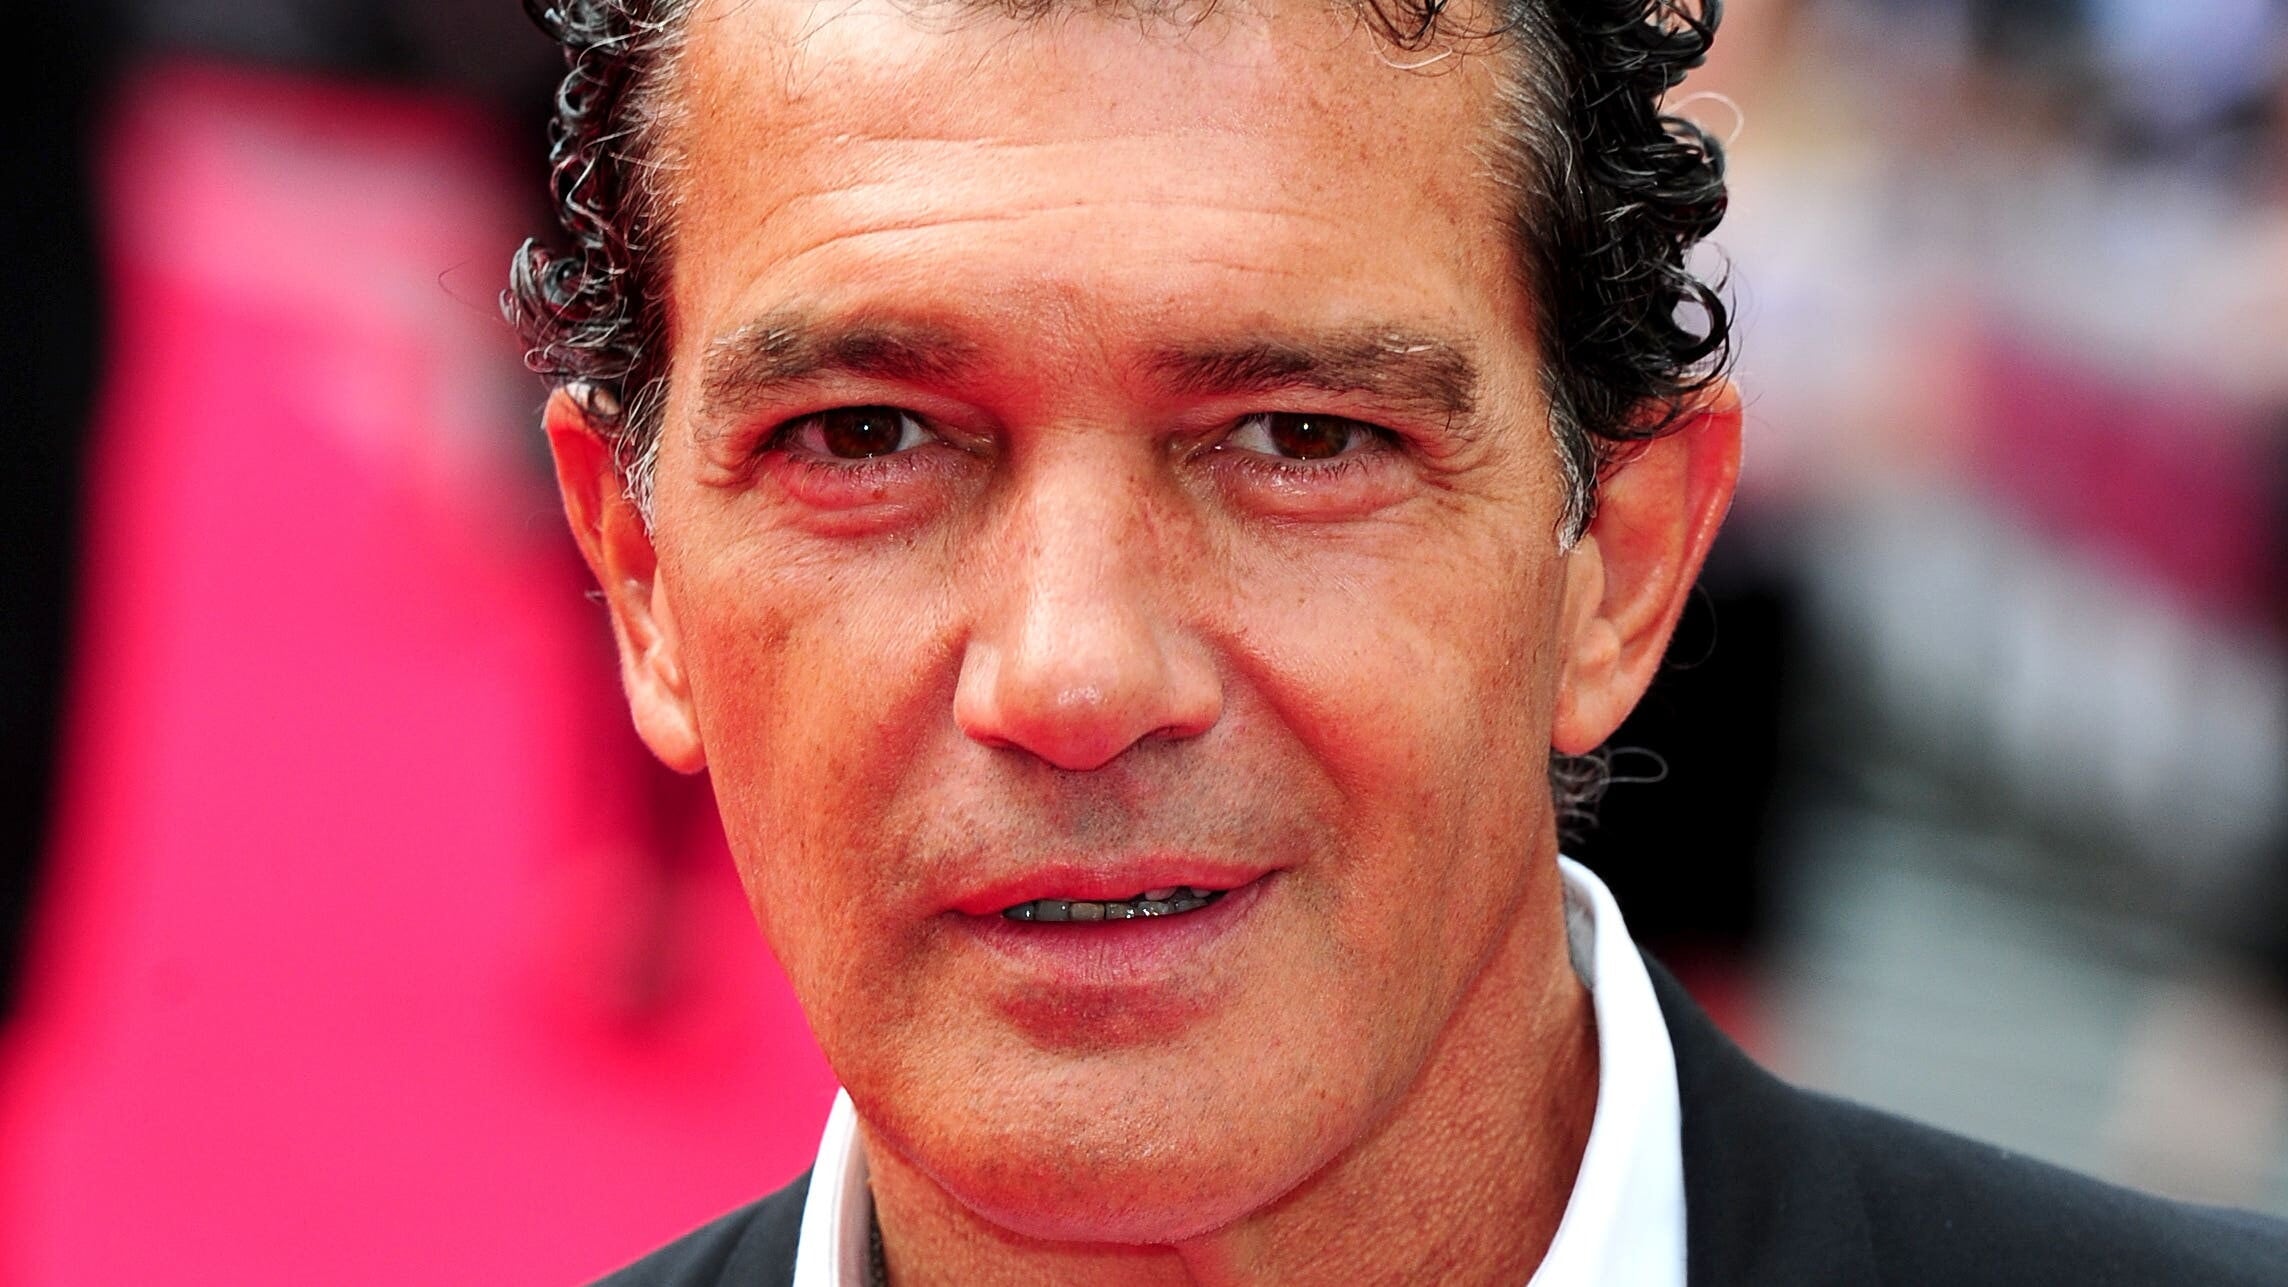 The Oscar-nominated Spanish actor said the health scare in 2017 forced him to look at his career ‘from a different point of view’.